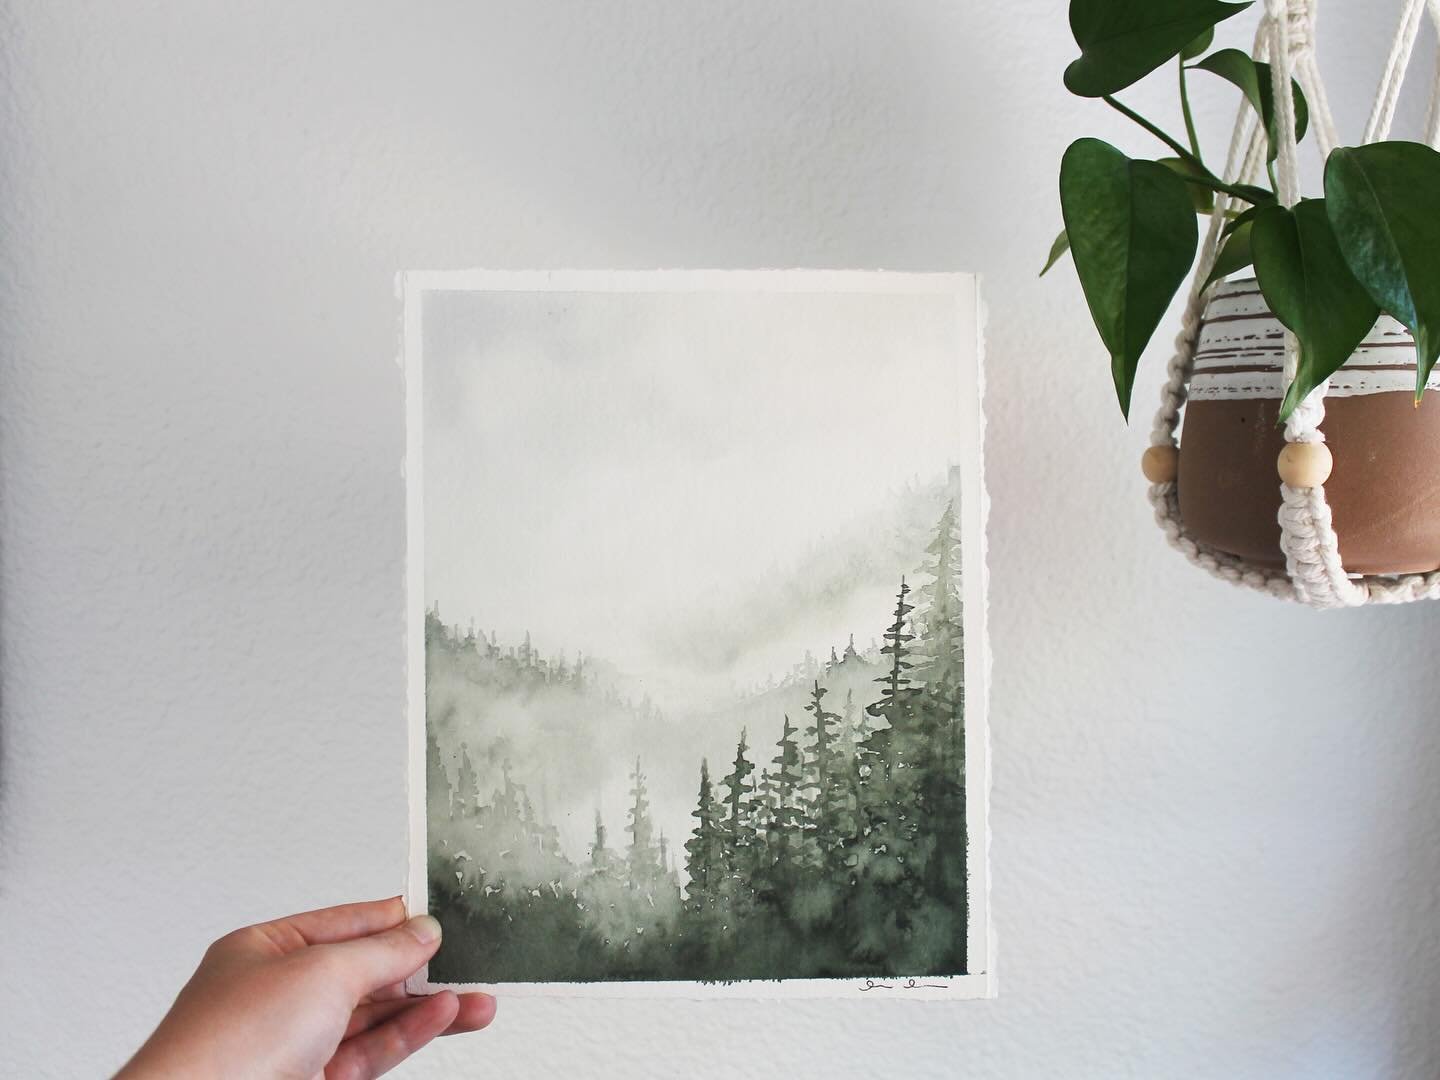 Treeline | 8x10 original watercolor
Buy on Etsy, link in bio!

This is one of the originals that didn&rsquo;t get snagged at art show, listed now on #etsy 

Excited to keep making some of these original misty trees 🌲

#watercolor #watercolortree #wa